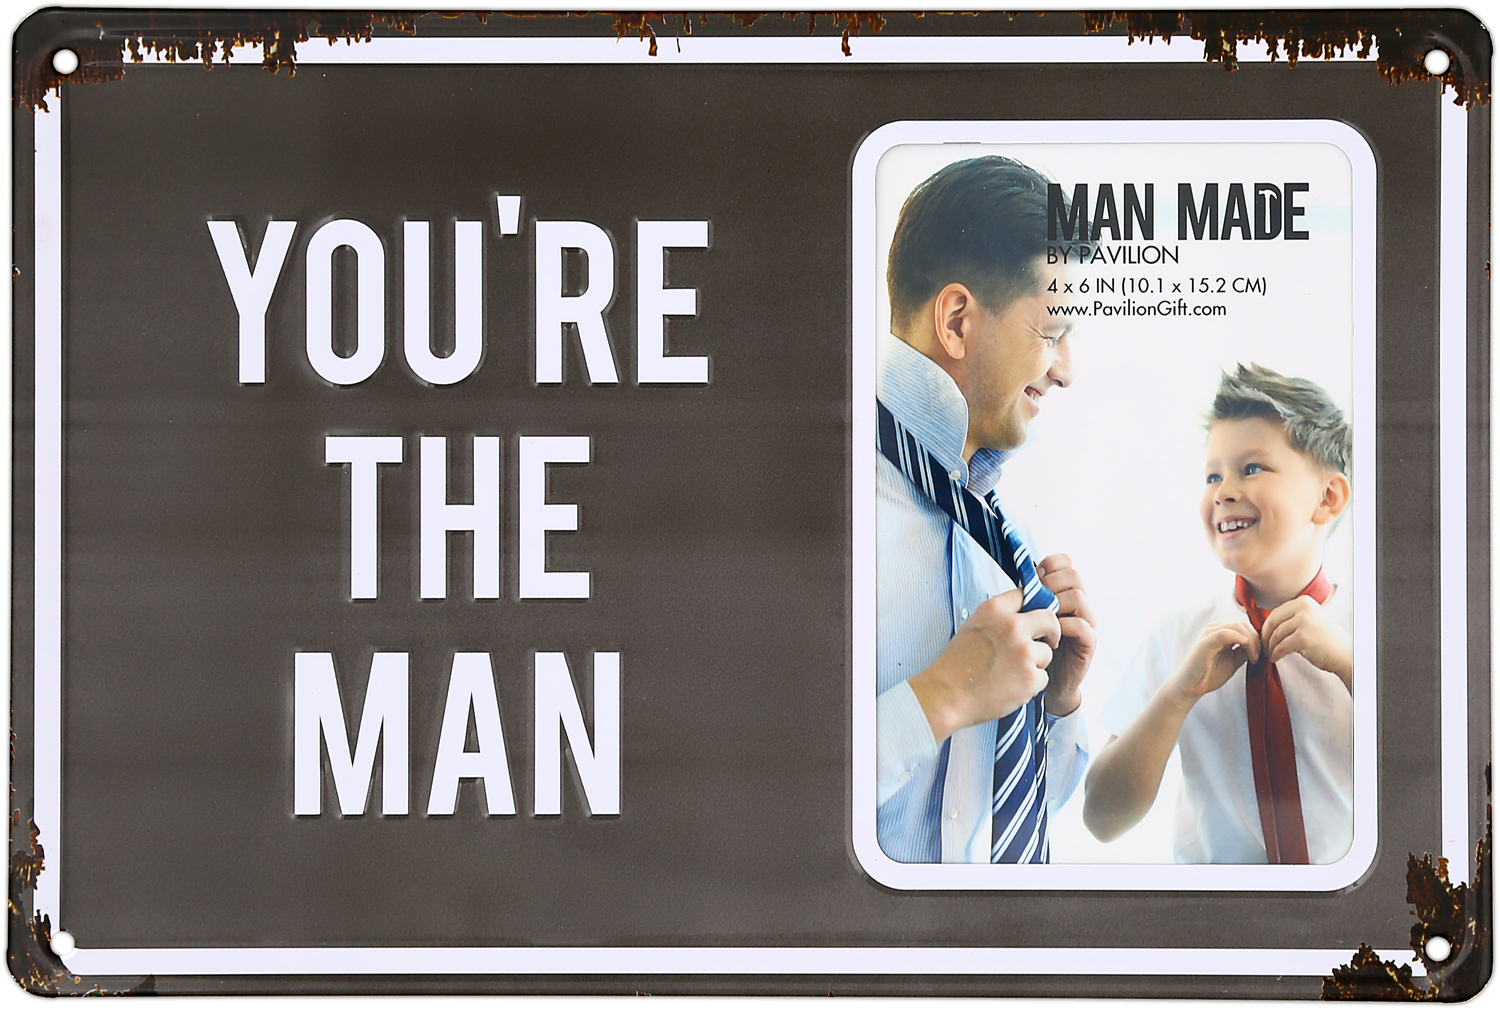 The Man by Man Made - The Man - 11.75" x 8" Tin Frame
(Holds 4" x 6" Photo)